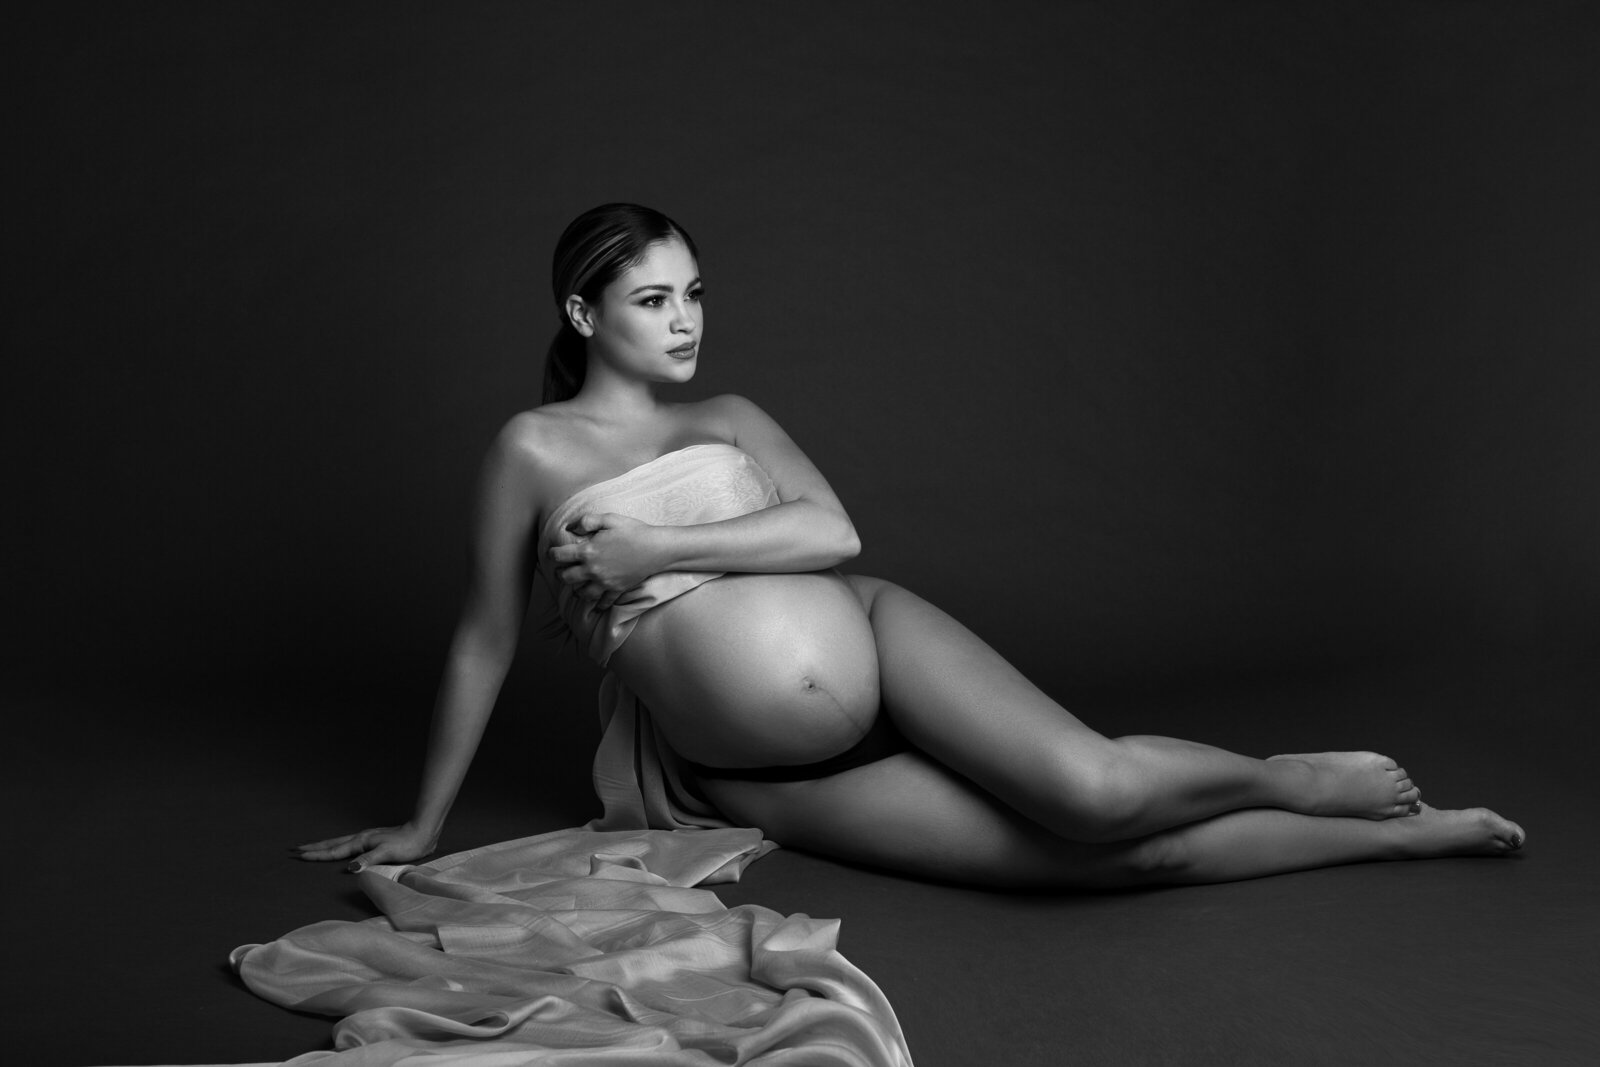 Another stunning maternity portrait by photographer Daisy Rey